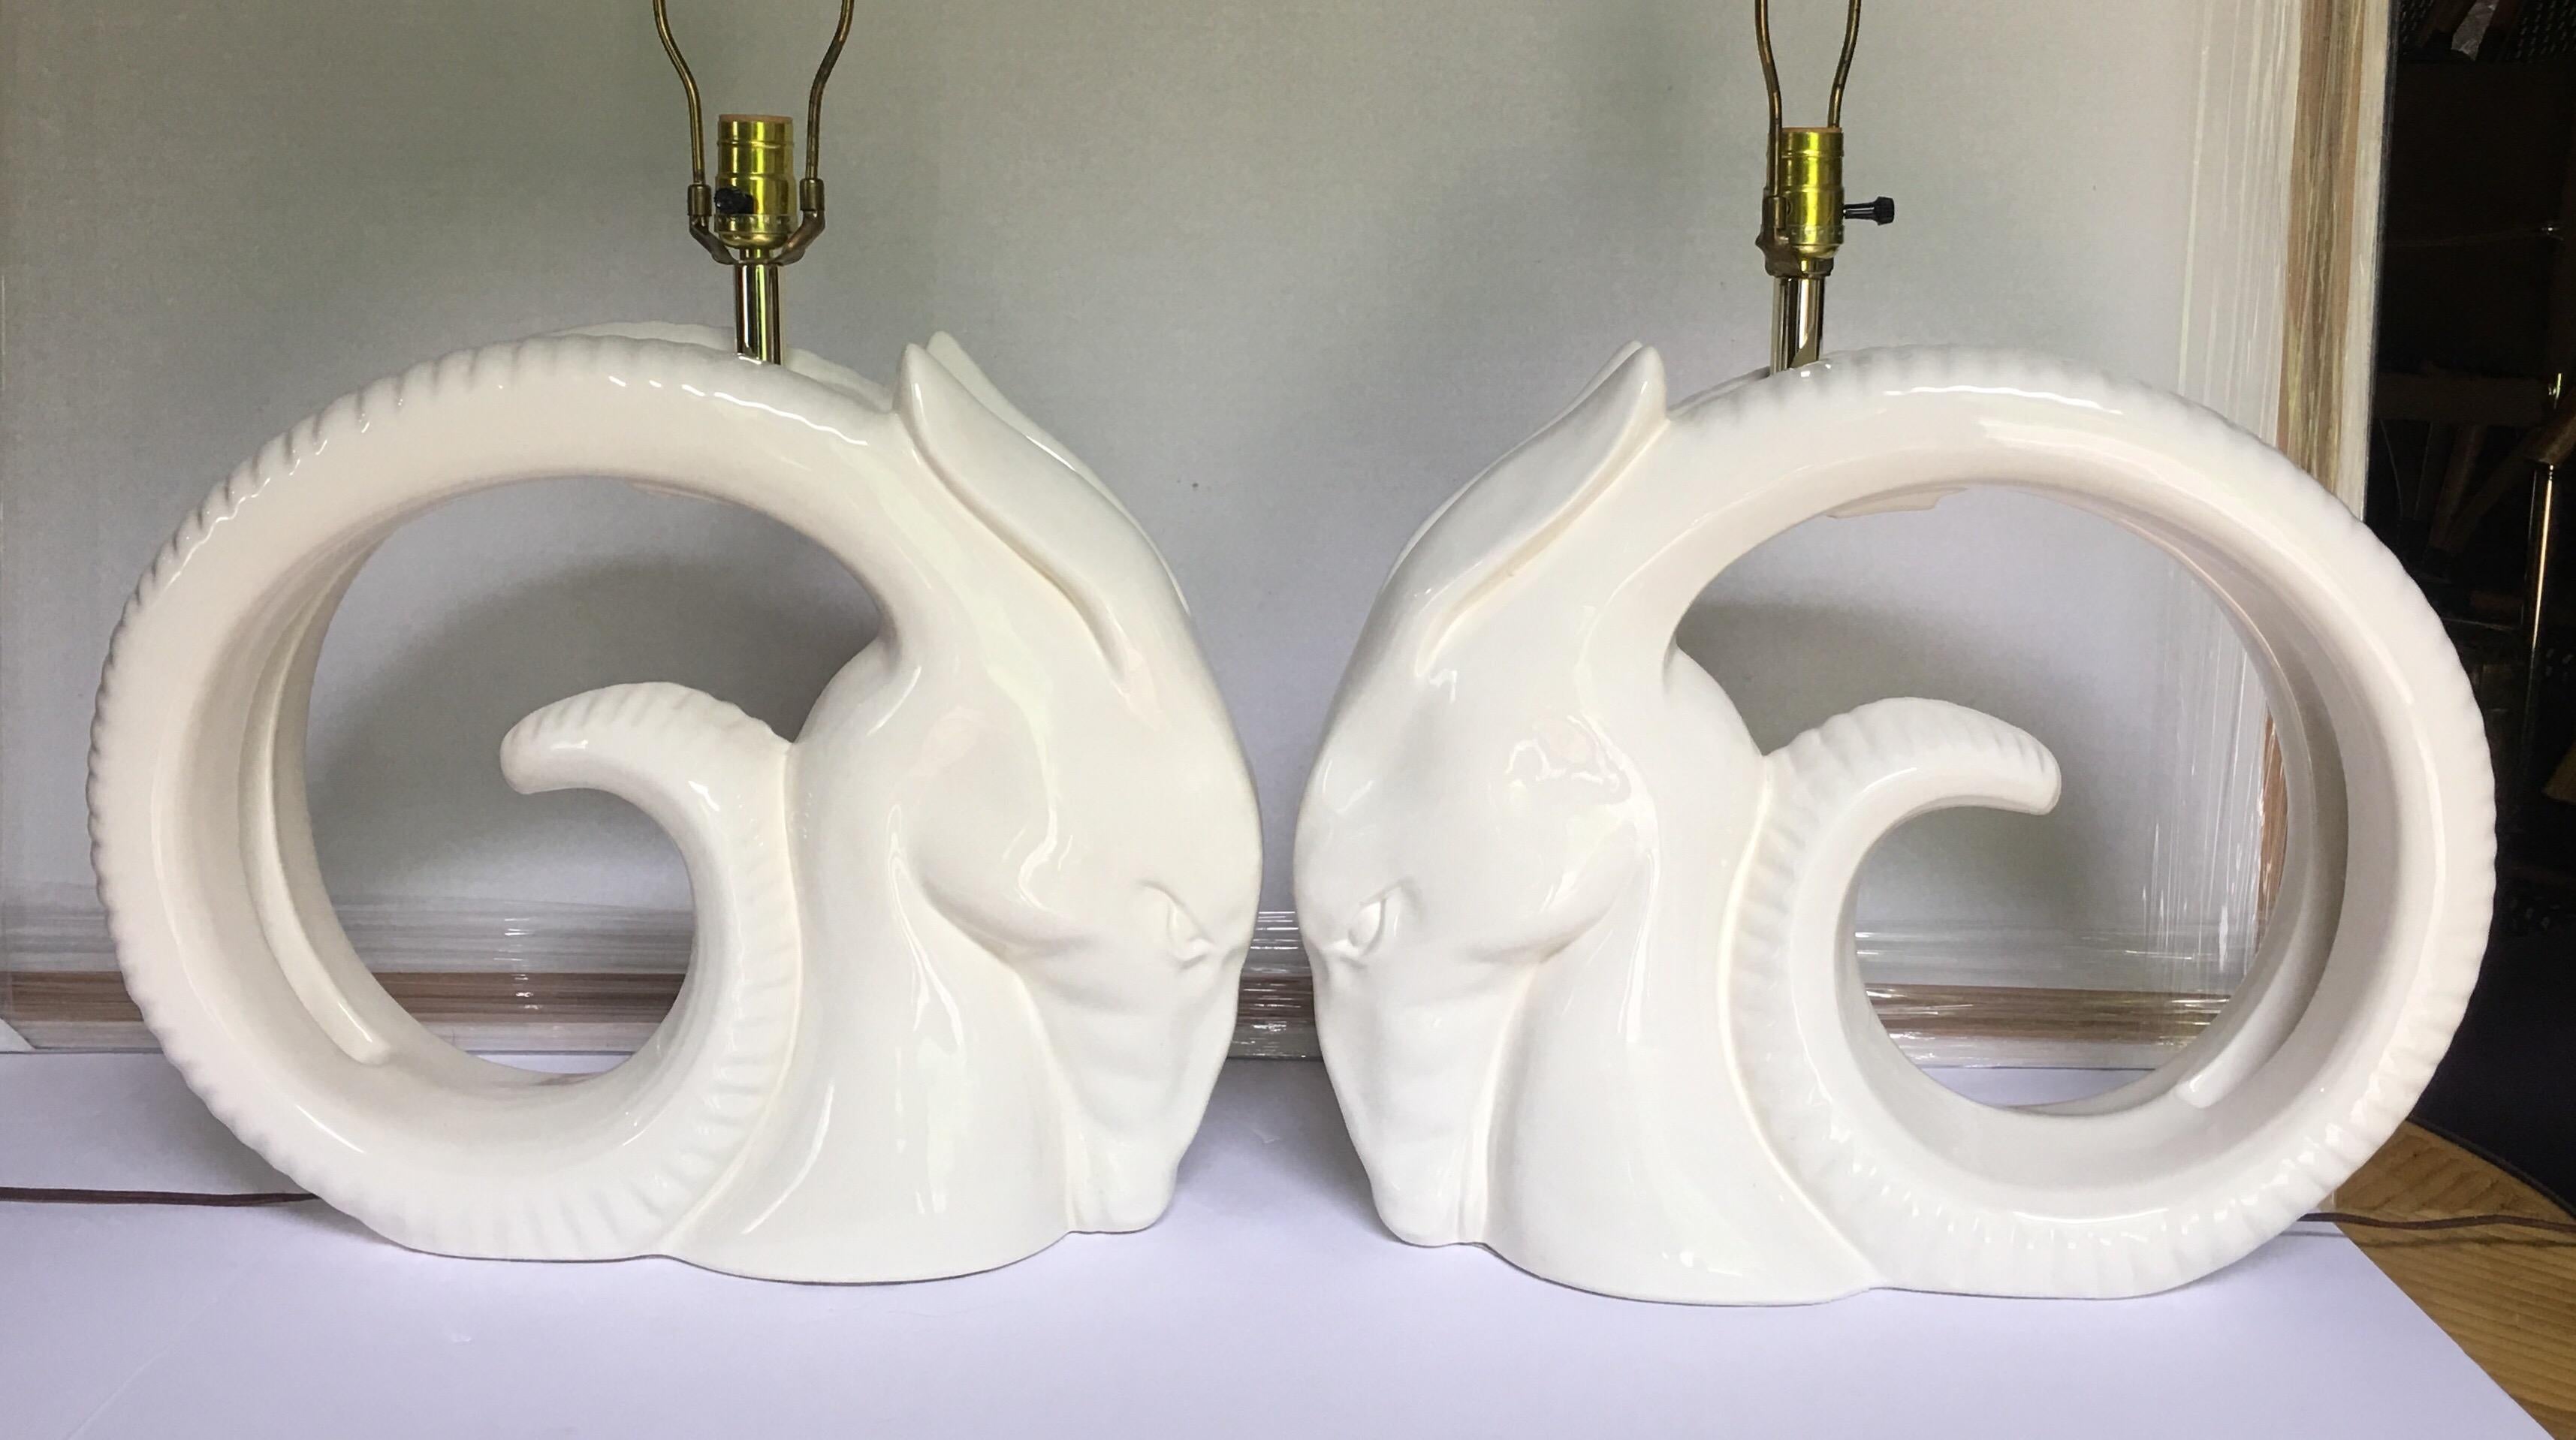 Large Mid-Century Modern animal head bust table lamps. Sculptural form ceramic glazed ram, gazelle or antelope with large curved horns. Lamp Shades not included. 

Price is per lamp. 

Measures: Height 31.5 inches to finial. 19.5 inches to socket.